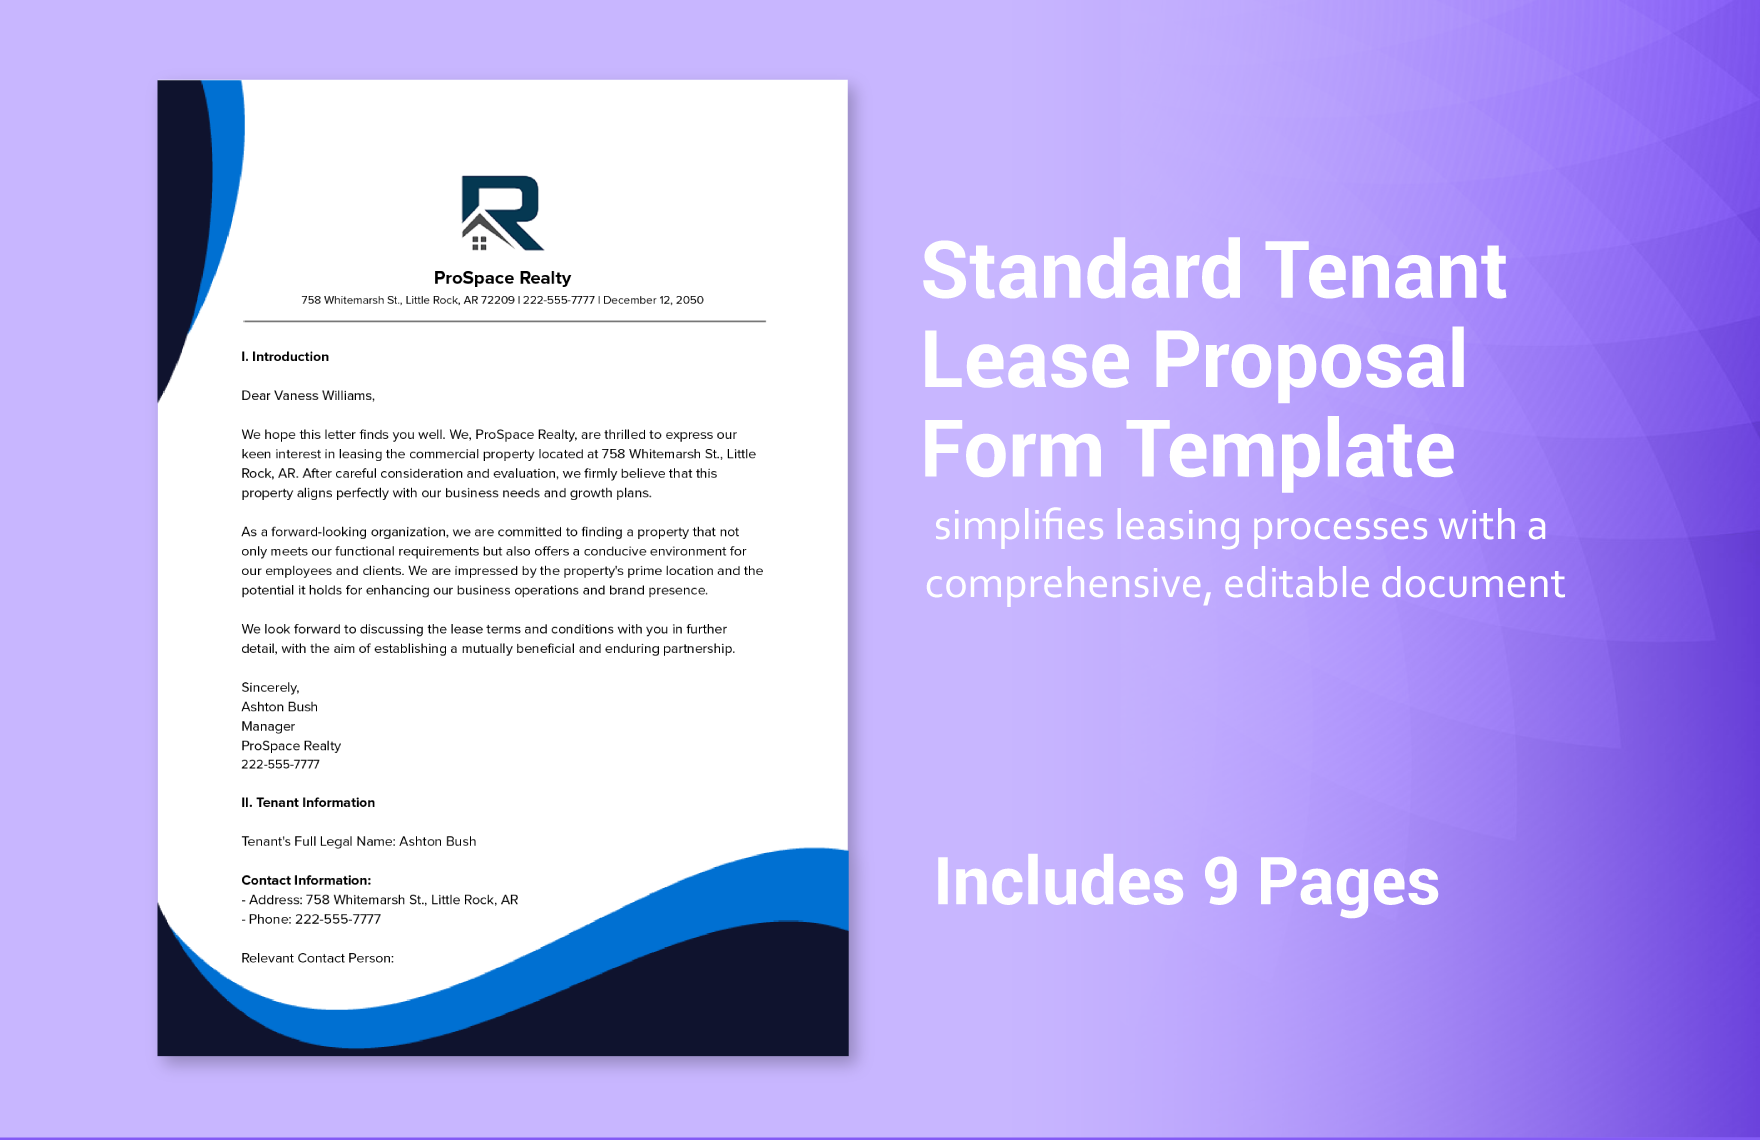 Standard Tenant Lease Proposal Form Template